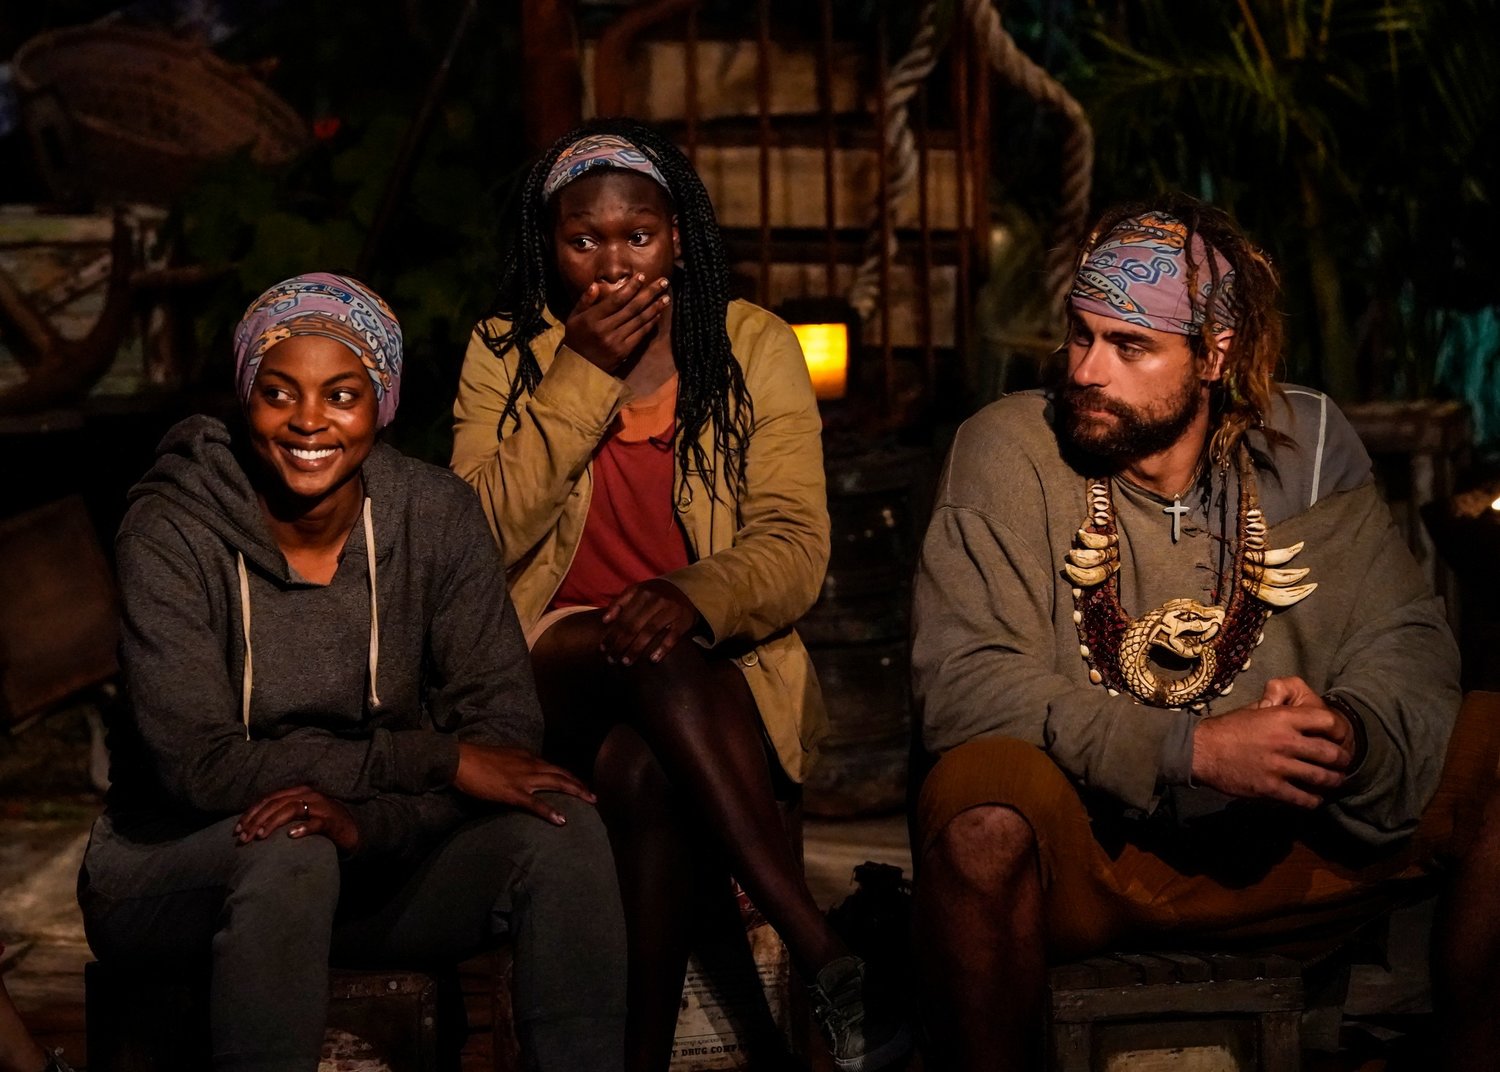 Tribal council is full of twists and turns.